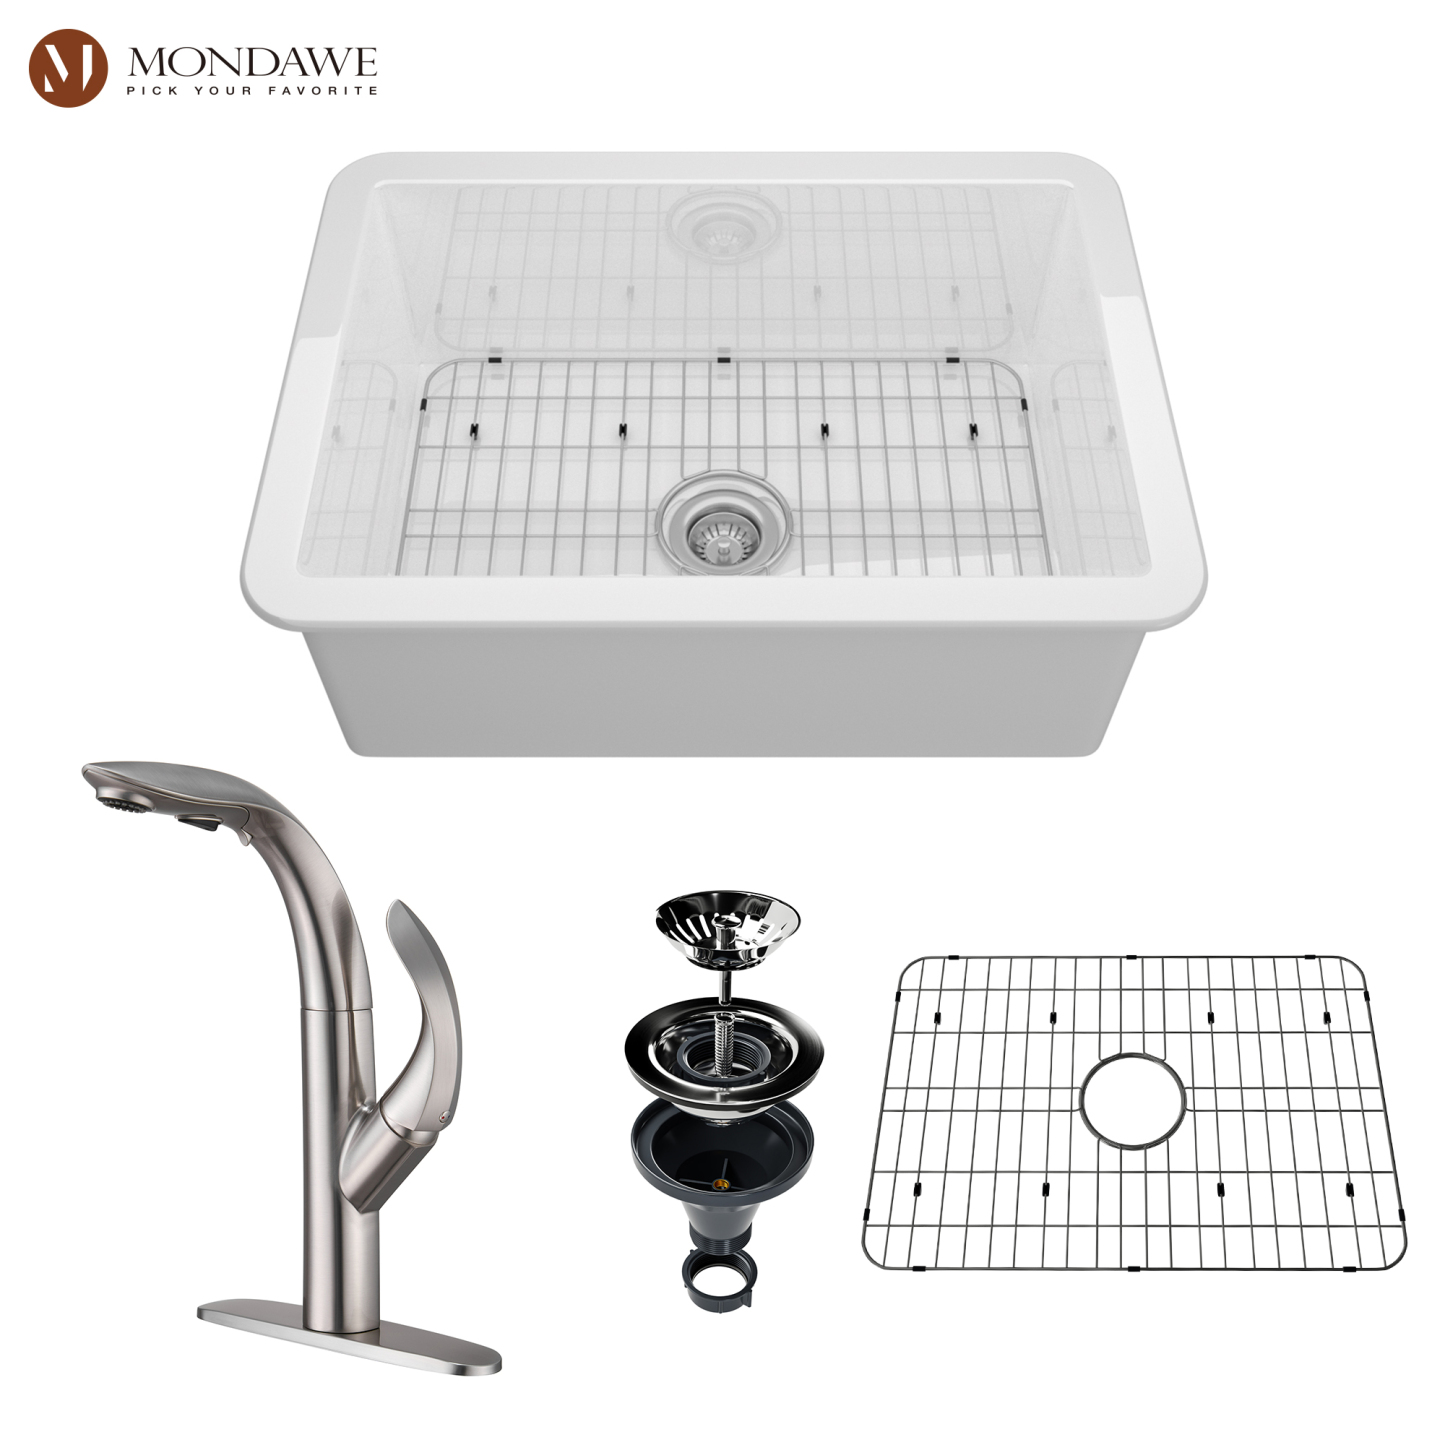 Undermount 27 In. Single Bowl Fireclay Kitchen Sink In White Comes With Pull Down Kitchen Faucet-Mondawe